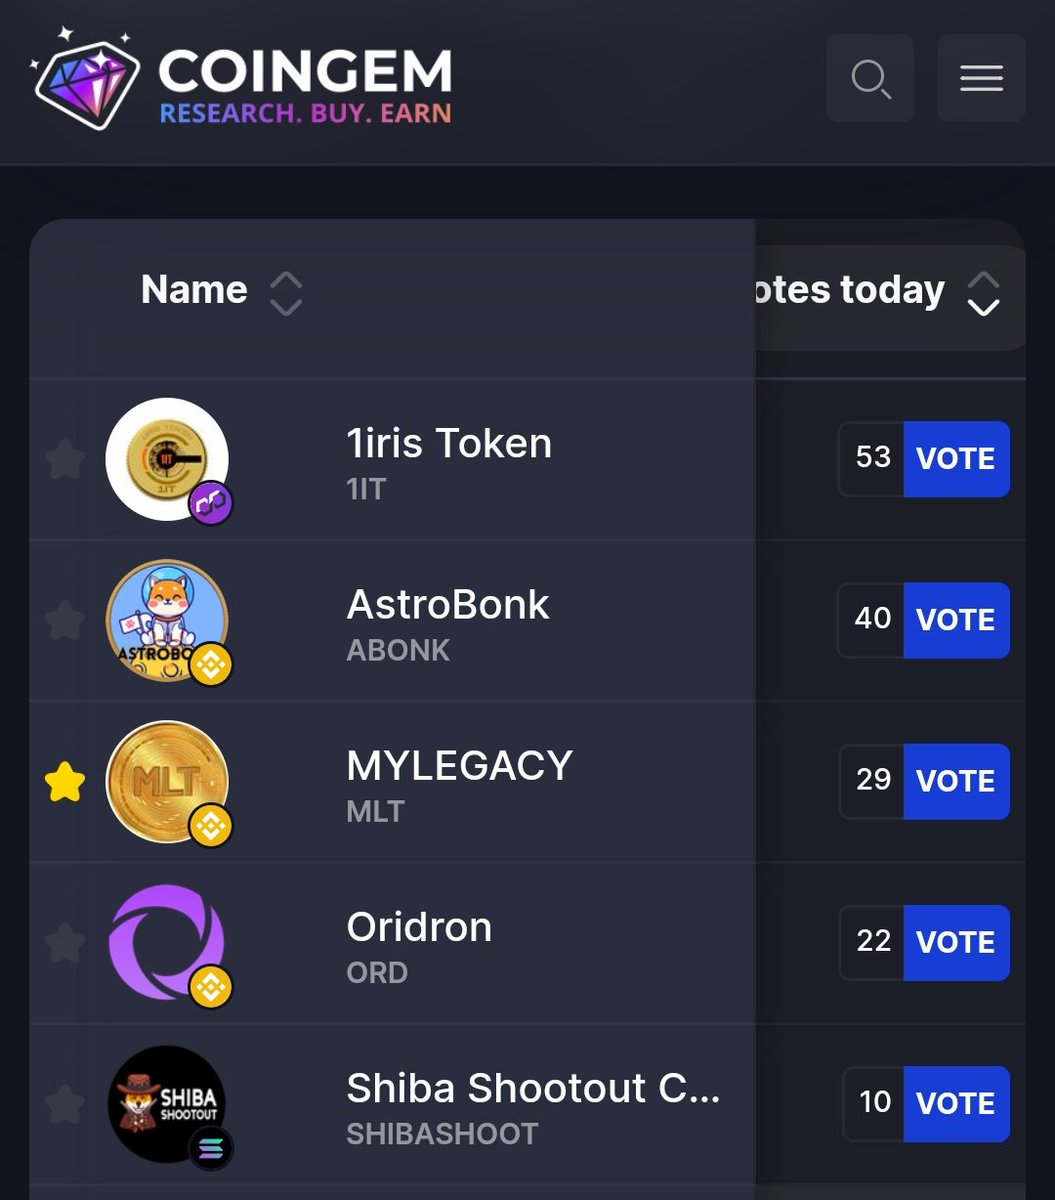 For the 3 consecutive days, MYlegacy token #MLT is one of the top 10 tokens on the coingem.com.

Join our community ; t.me/mylegacy_mlt🔥📍

Keep voting #MLT 
#MilleniaWallet 
#Mlc20